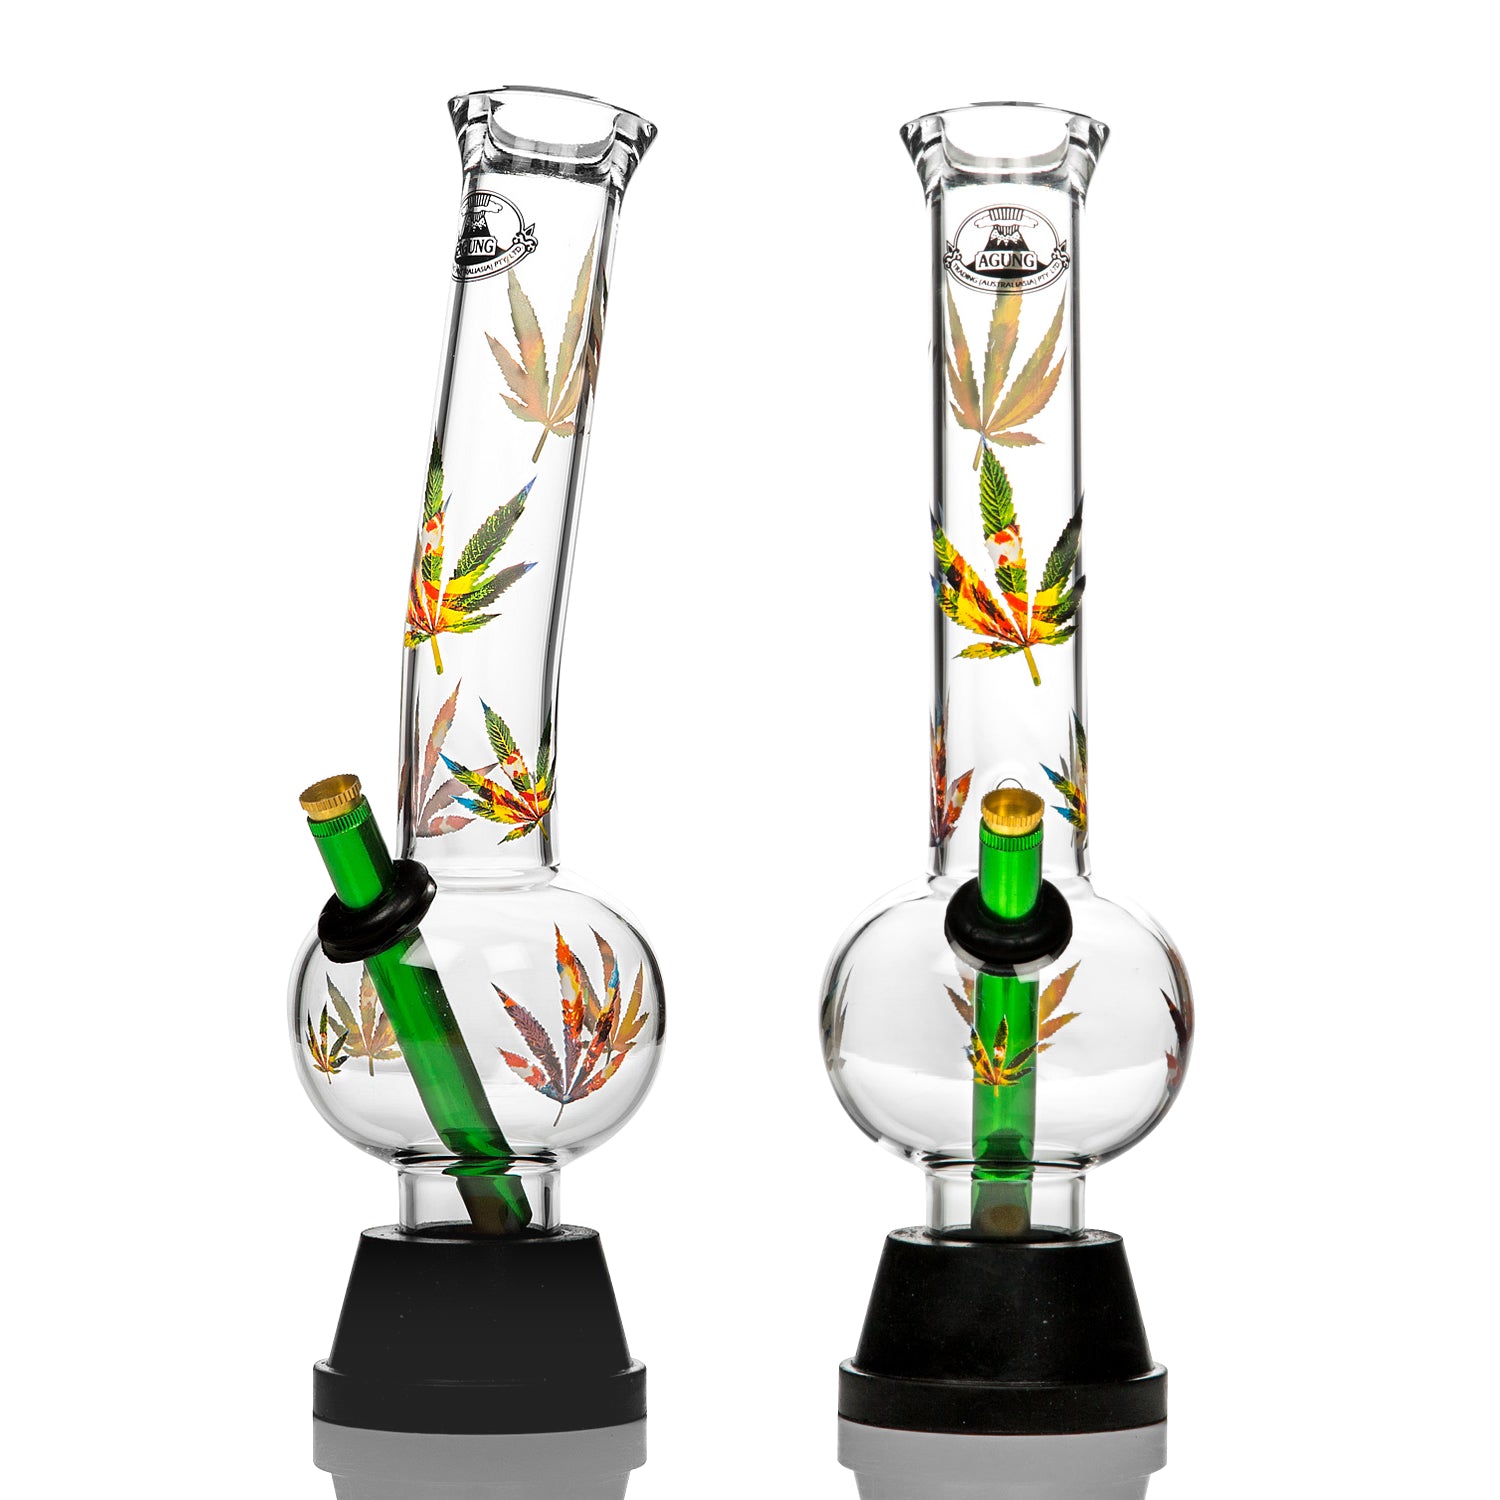 Agung glass bong withe clear glass and marijuana leaf decals.